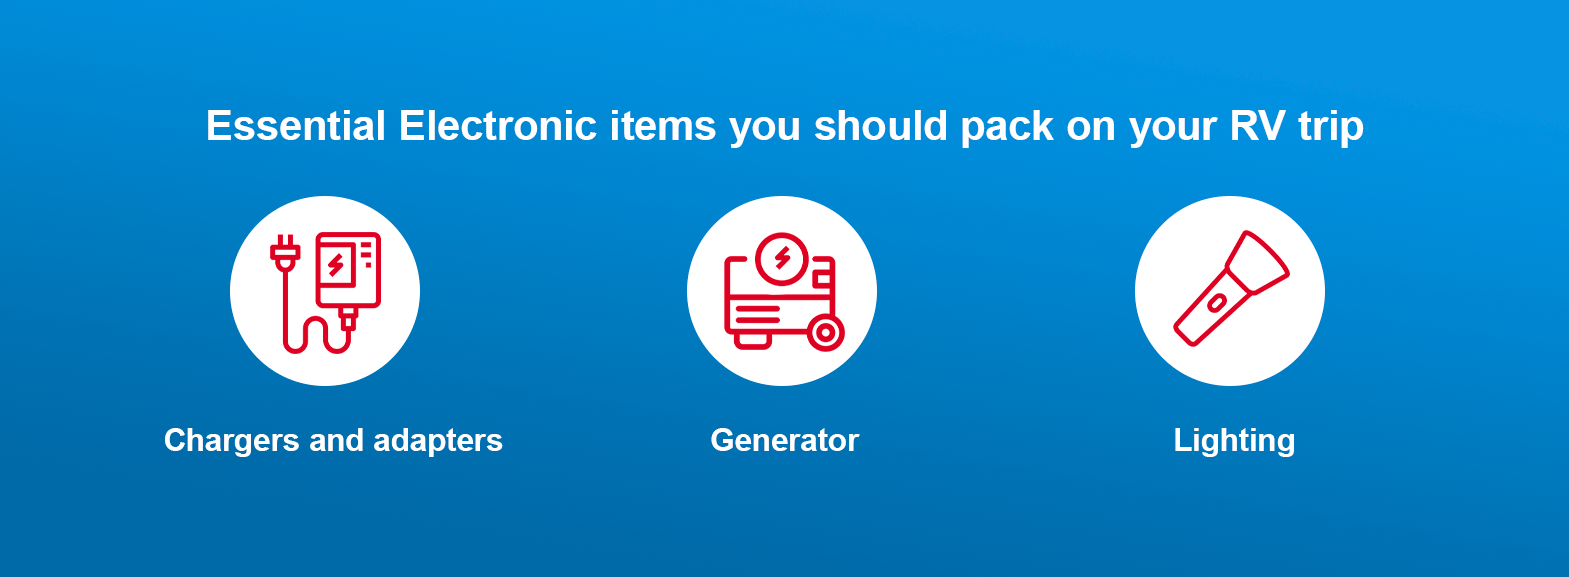 The essential electronic items and accessories you should pack on your RV trip include: